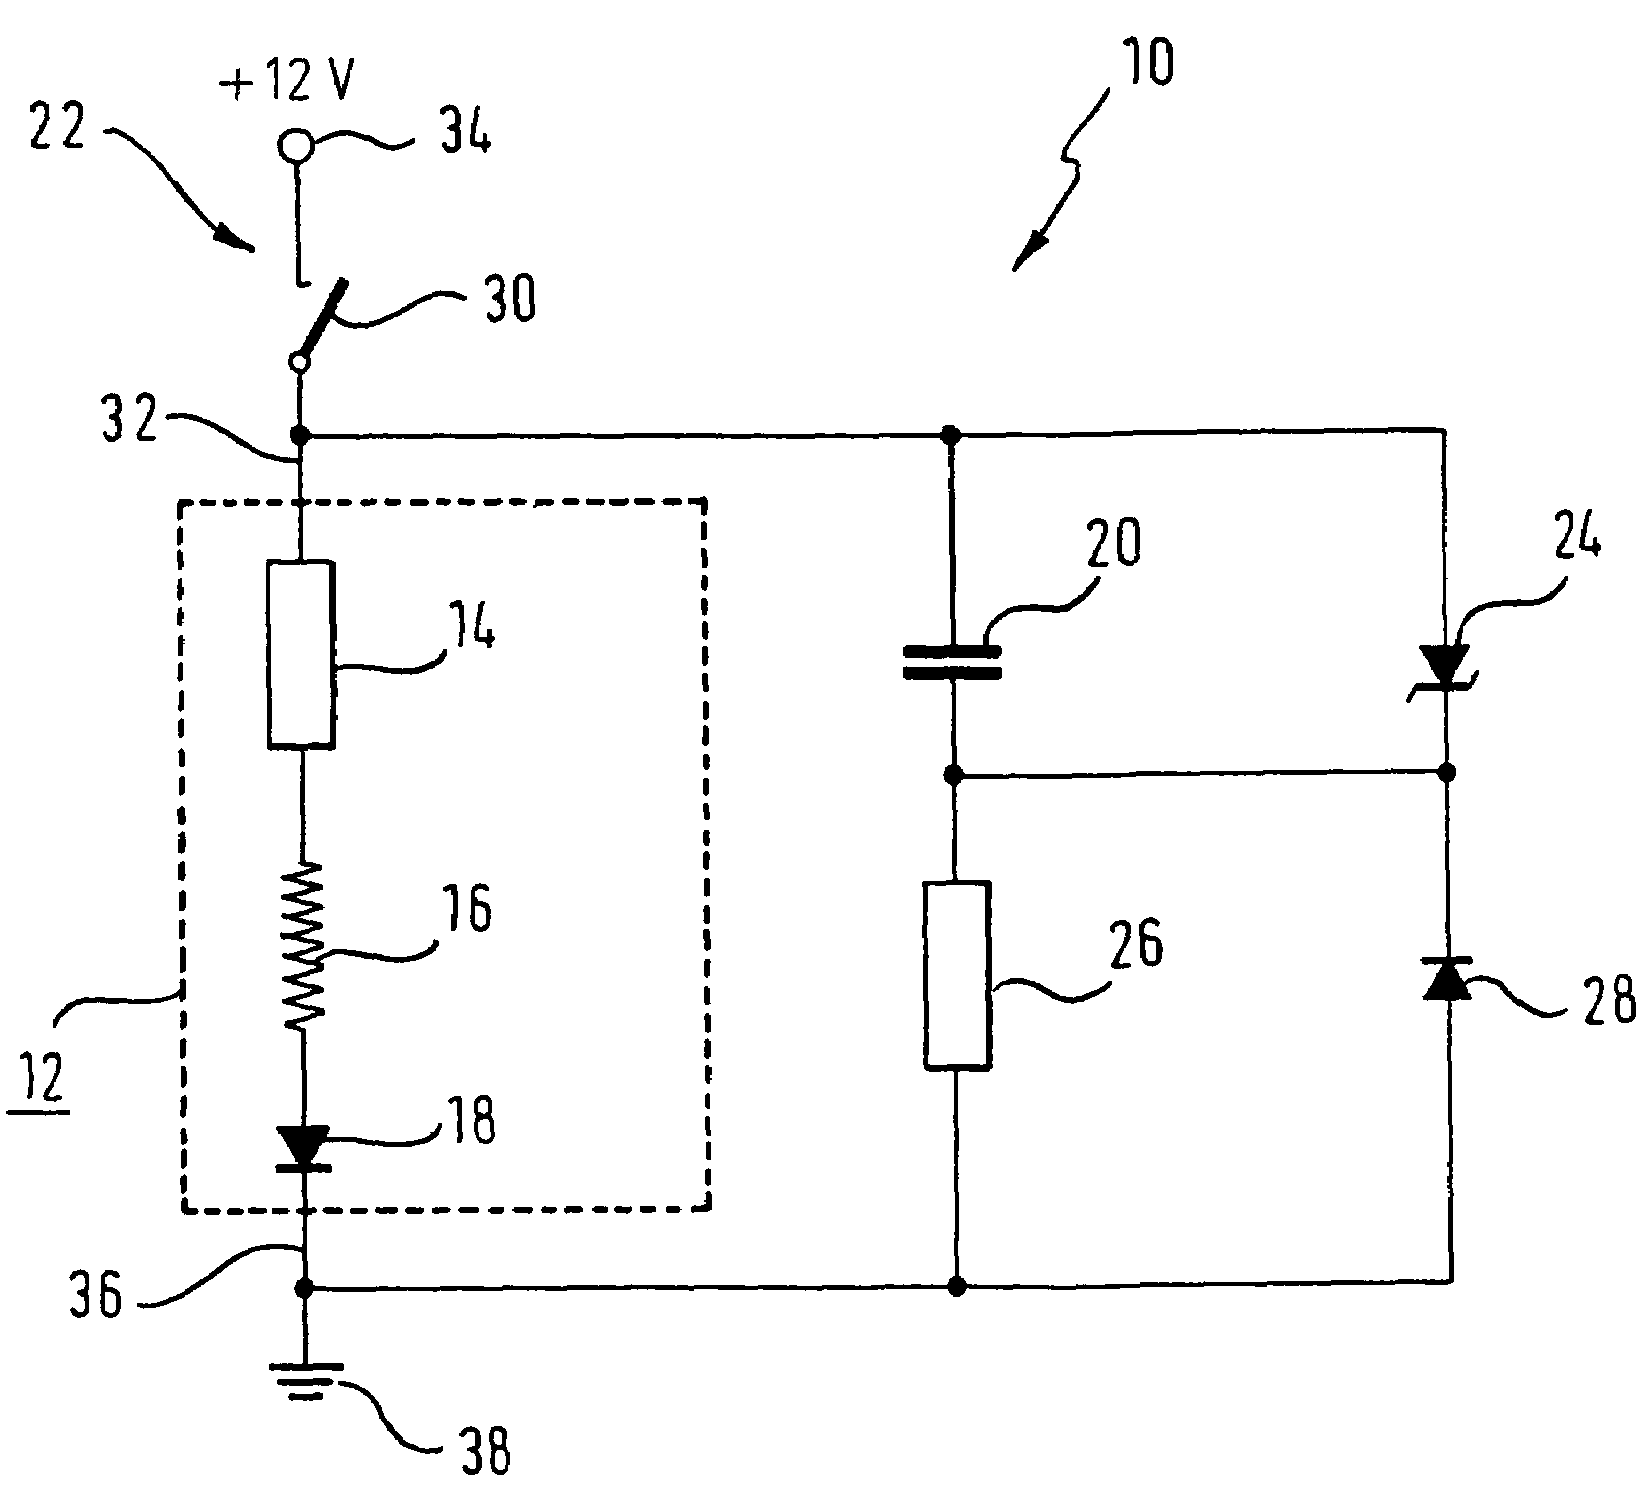 Driver circuit for an ion measurement device